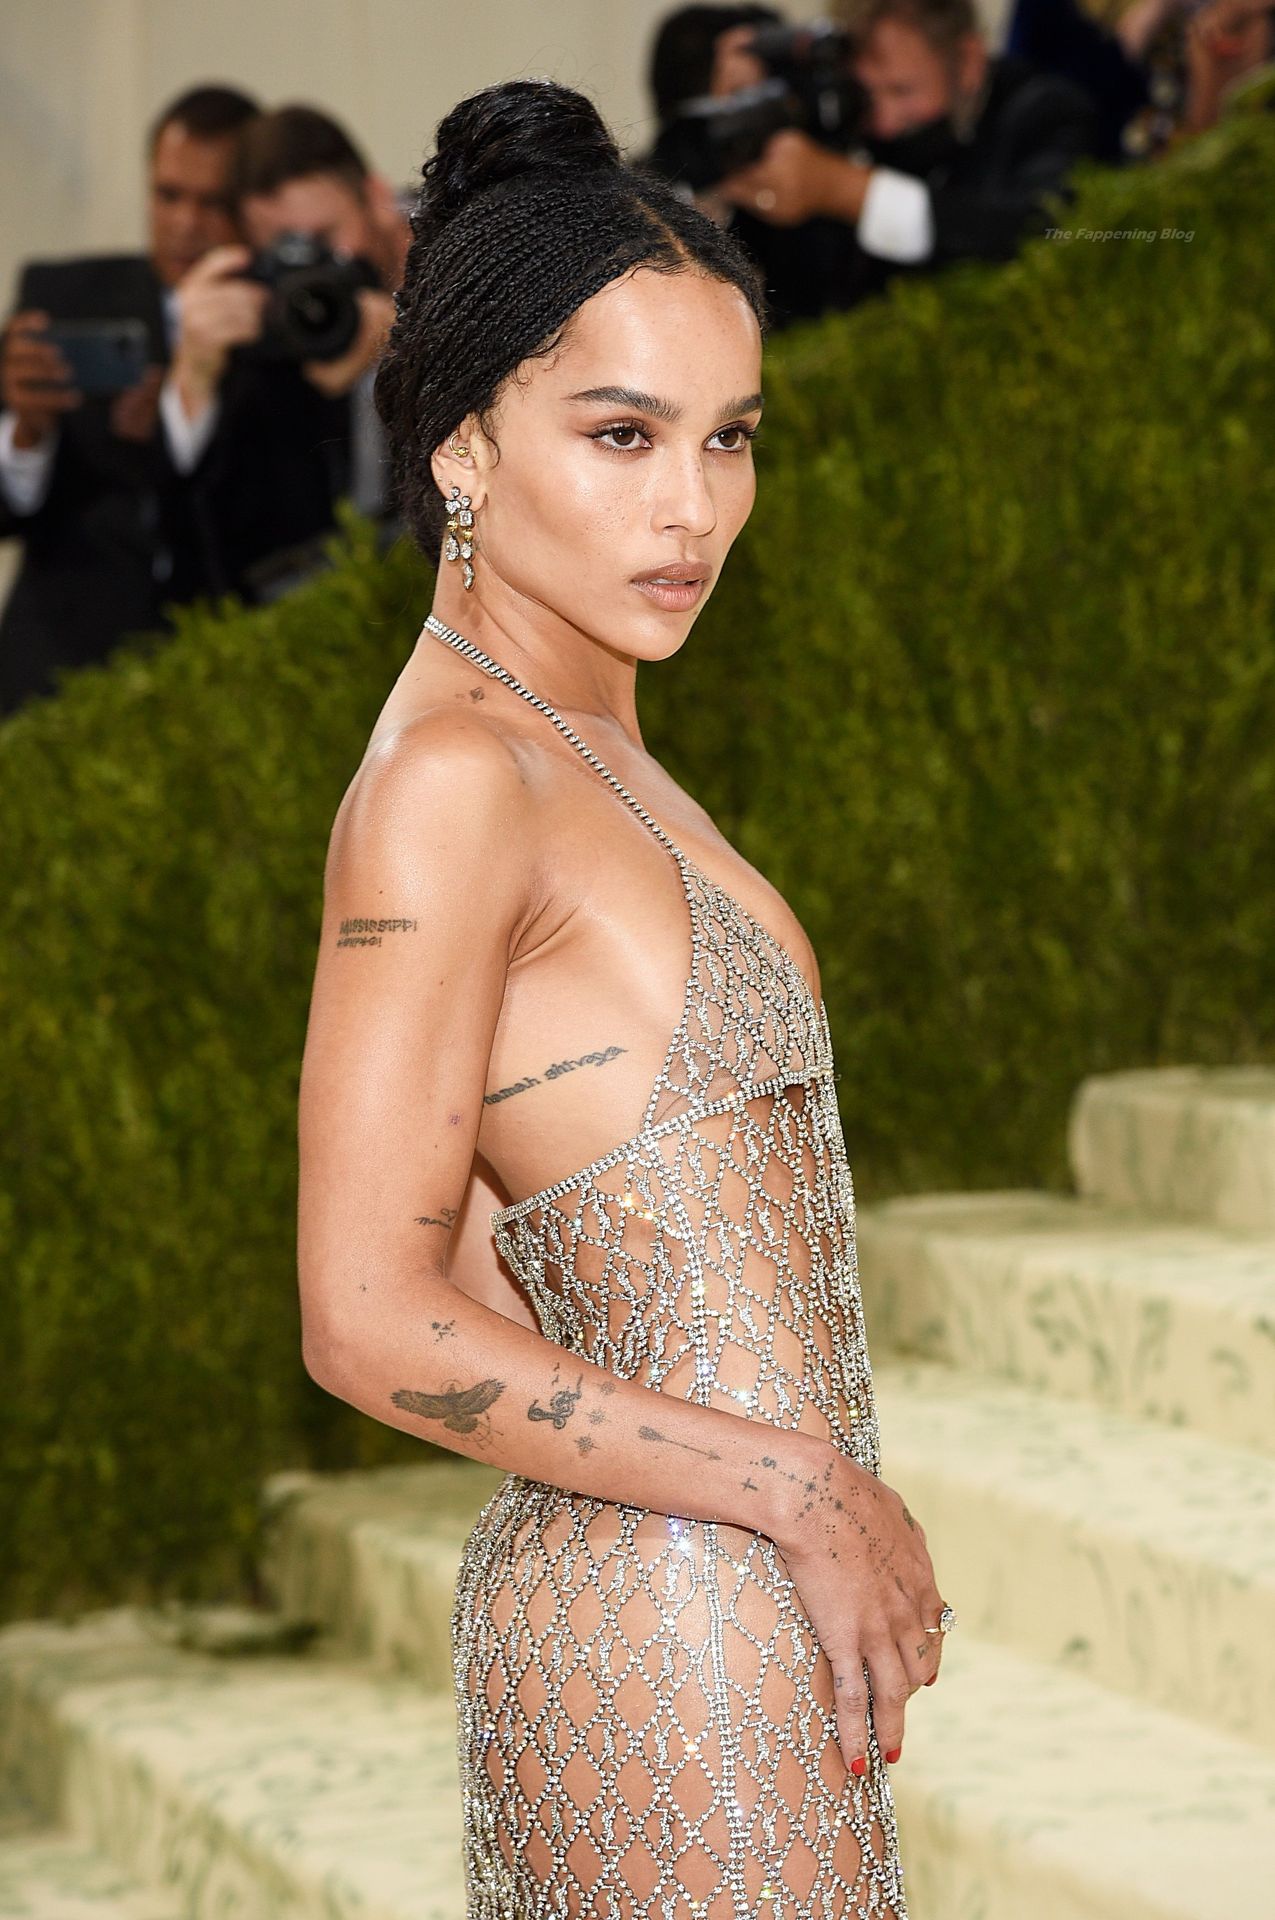 Zoe Kravitz is seen nearly naked walking on the red carpet at the 2021 Metr...